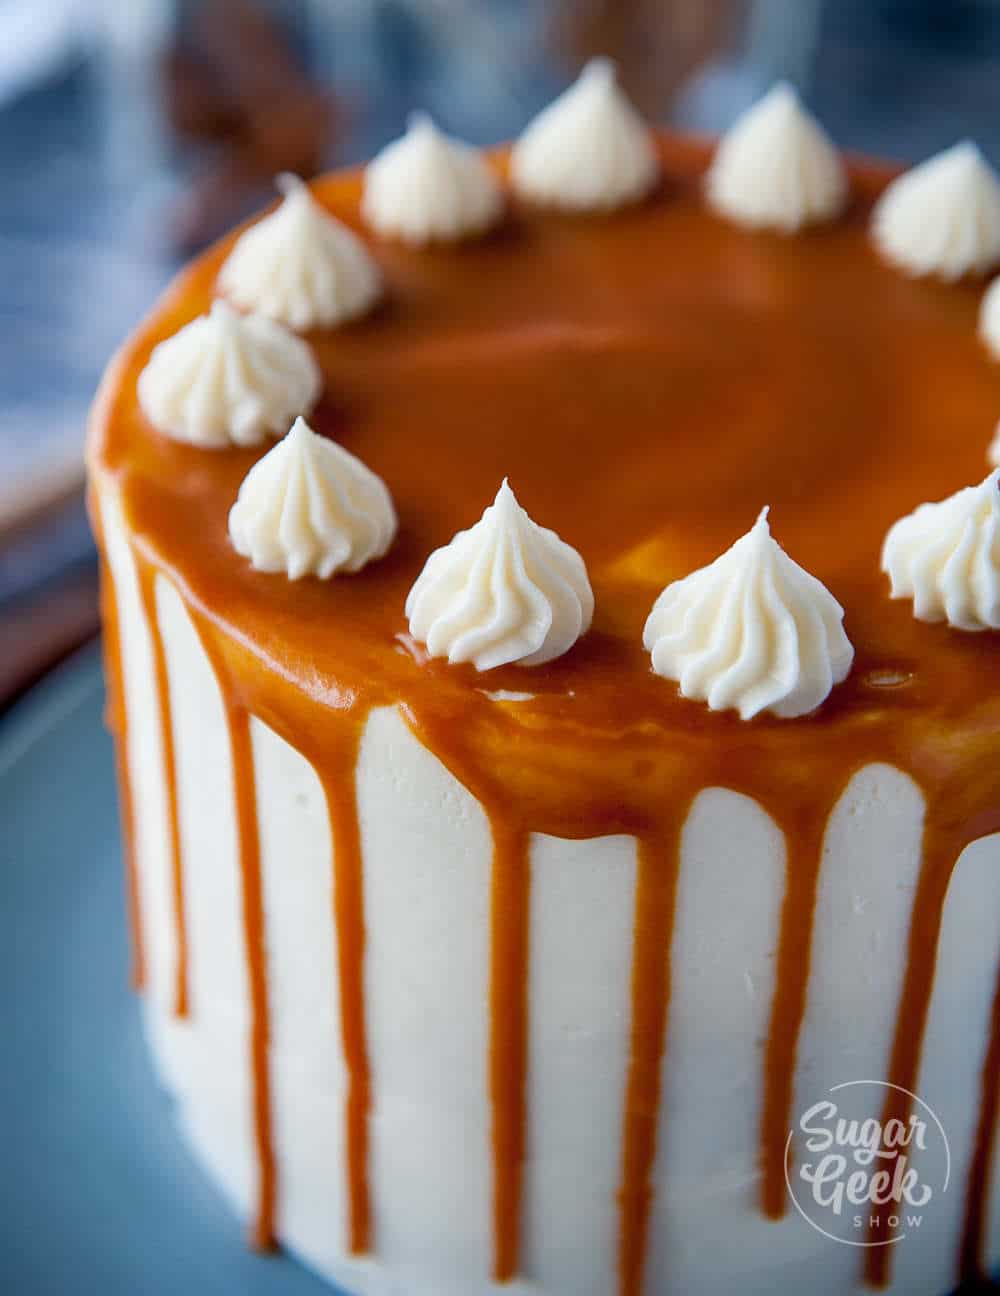 applesauce cake with cream cheese frosting and caramel drip